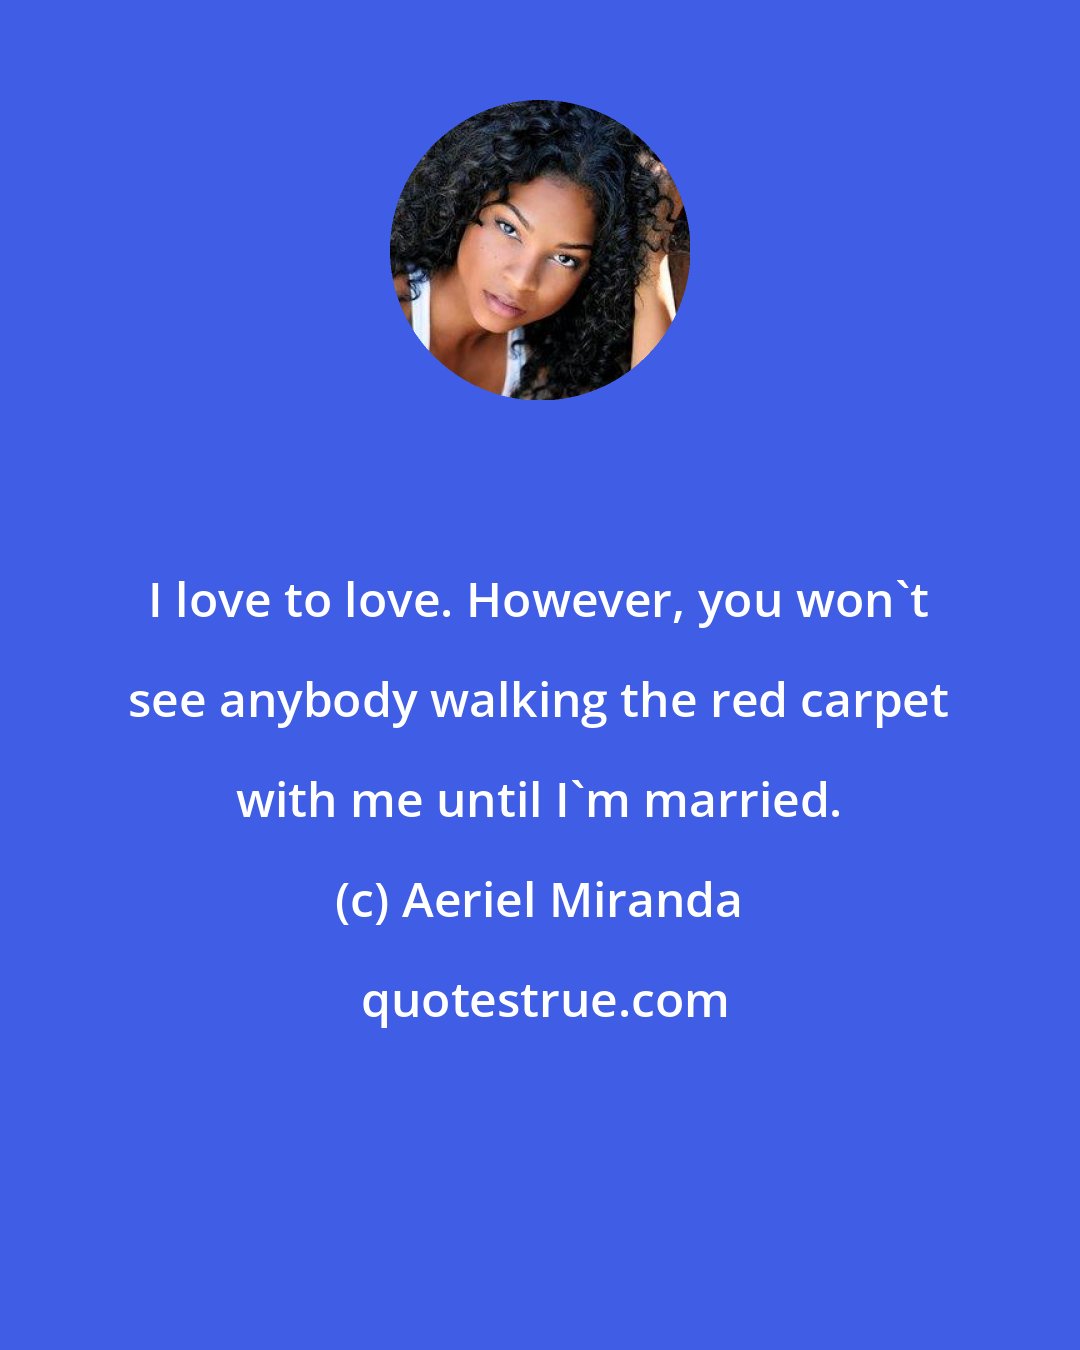 Aeriel Miranda: I love to love. However, you won't see anybody walking the red carpet with me until I'm married.